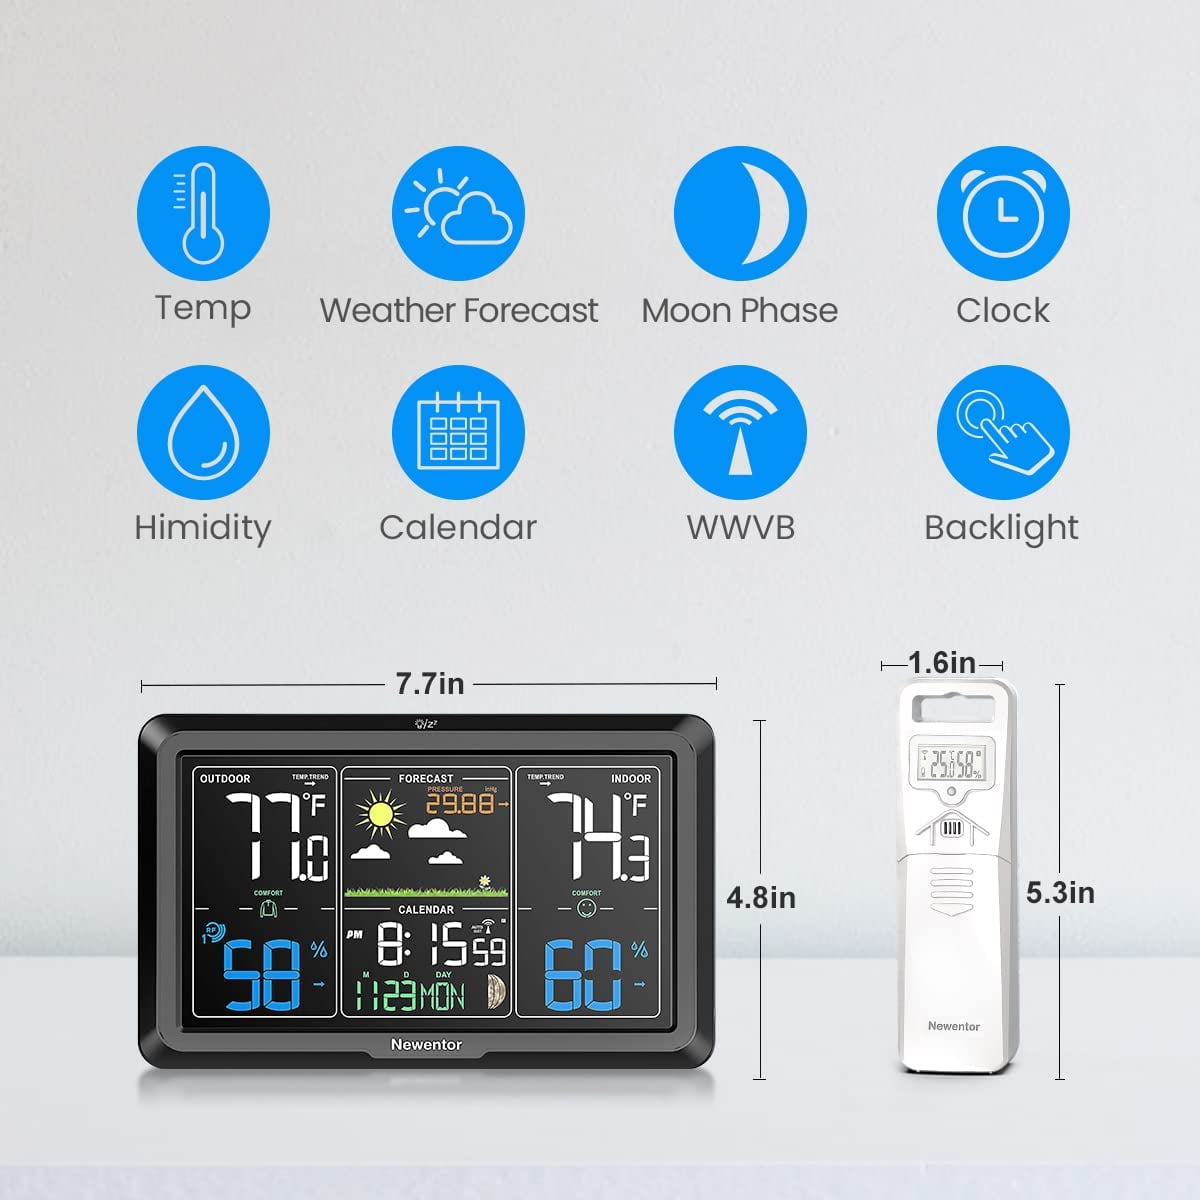 Newentor® Home Weather Station Q8 - Wireless Atomic All-In-1